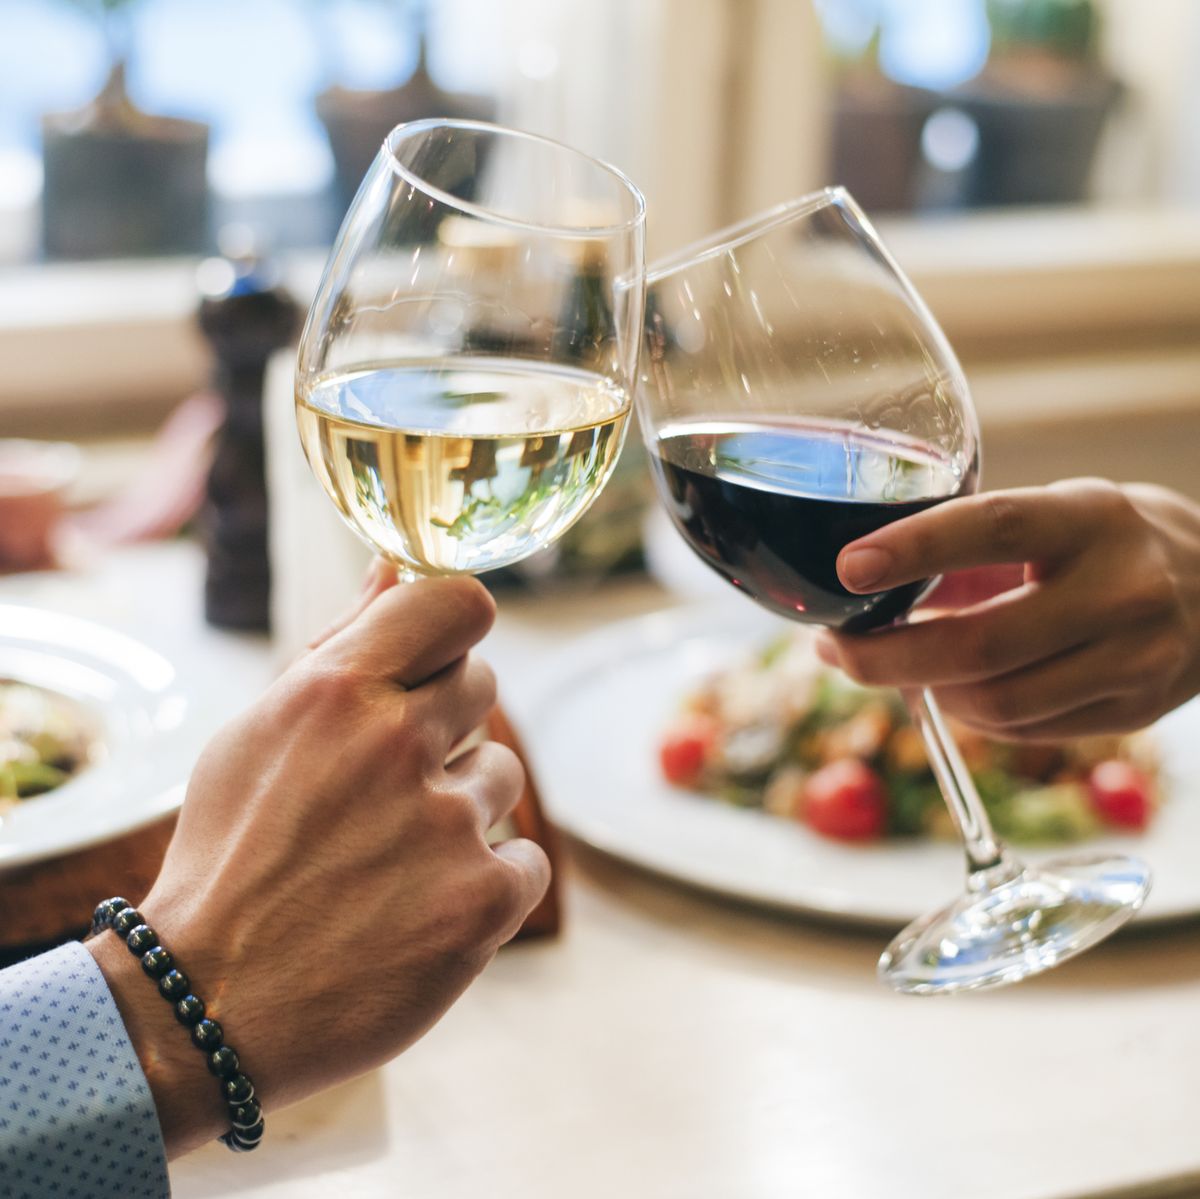 Two glasses of wine may contain more than the daily sugar limit